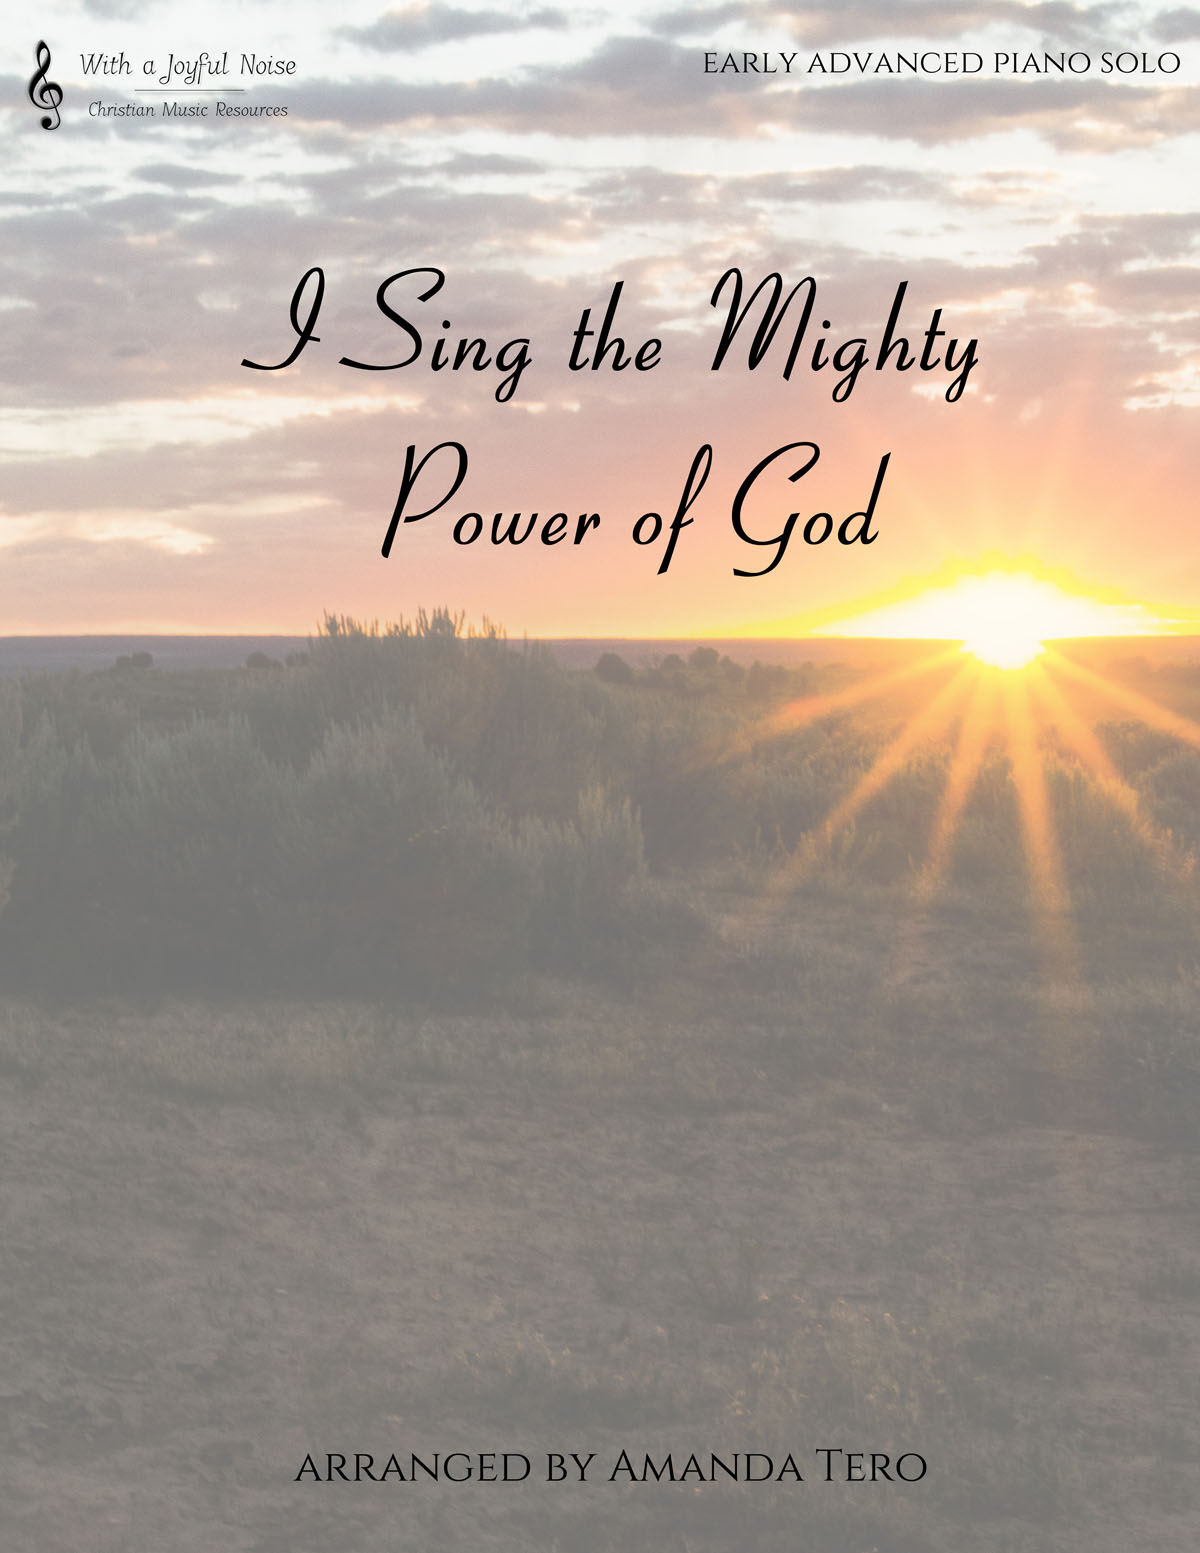 I Sing the Mighty Power of God Hymn Early Advanced piano solo sheet music